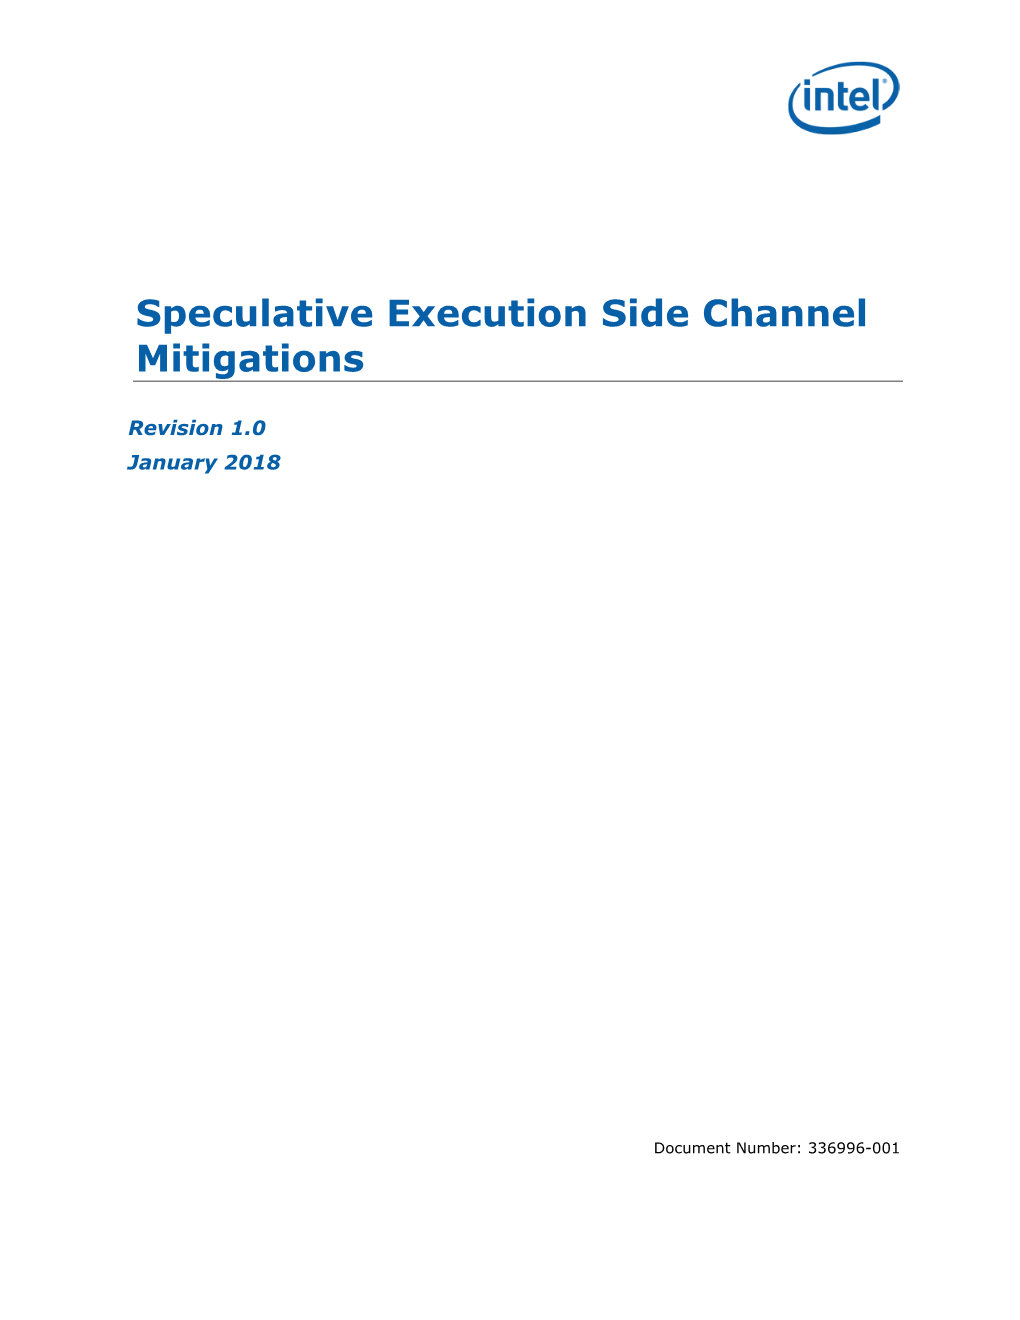 Speculative Execution Side Channel Mitigations